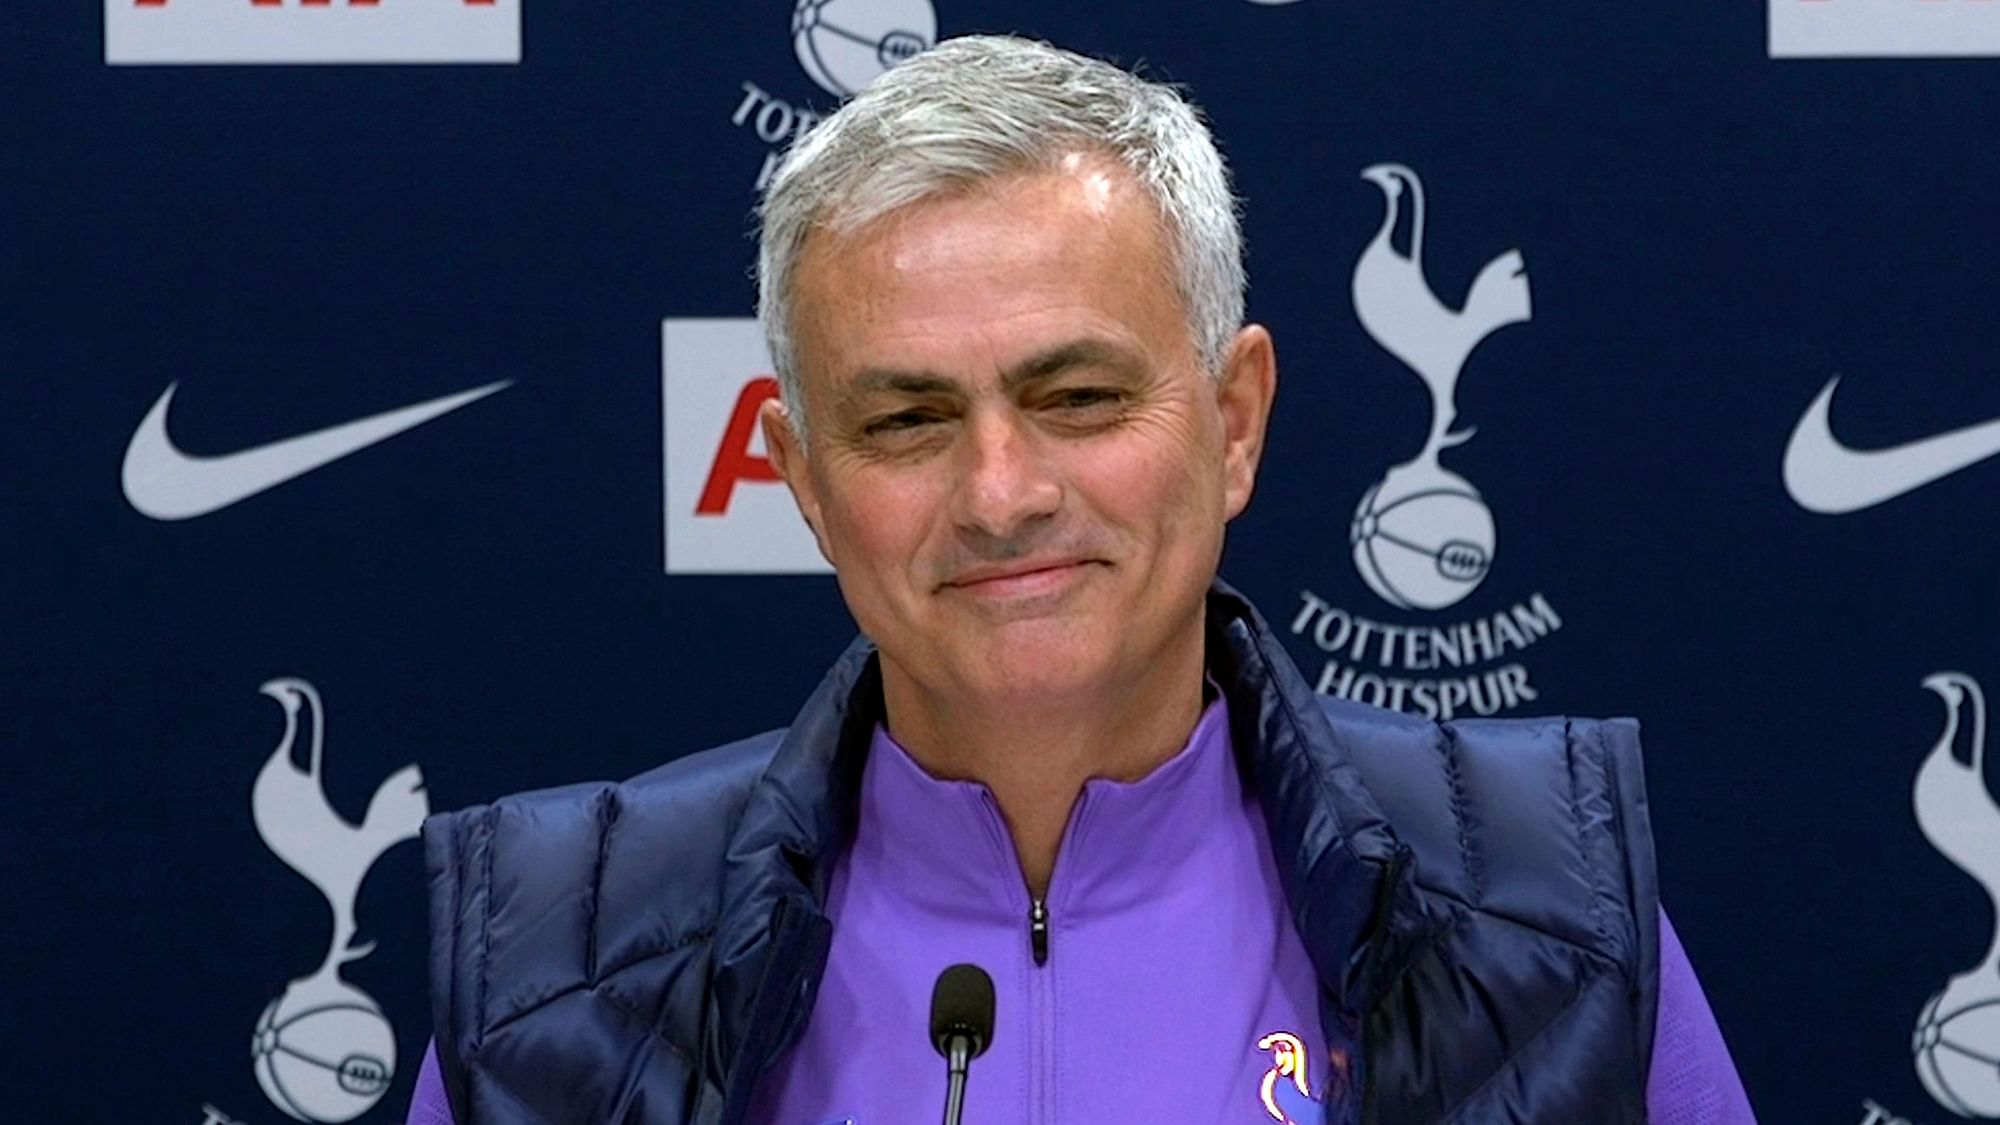 Image taken from PA Video showing newly appointed Tottenham Hotspur manager Jose Mourinho during a press conference at Tottenham Hotspur Training Centre, in London.